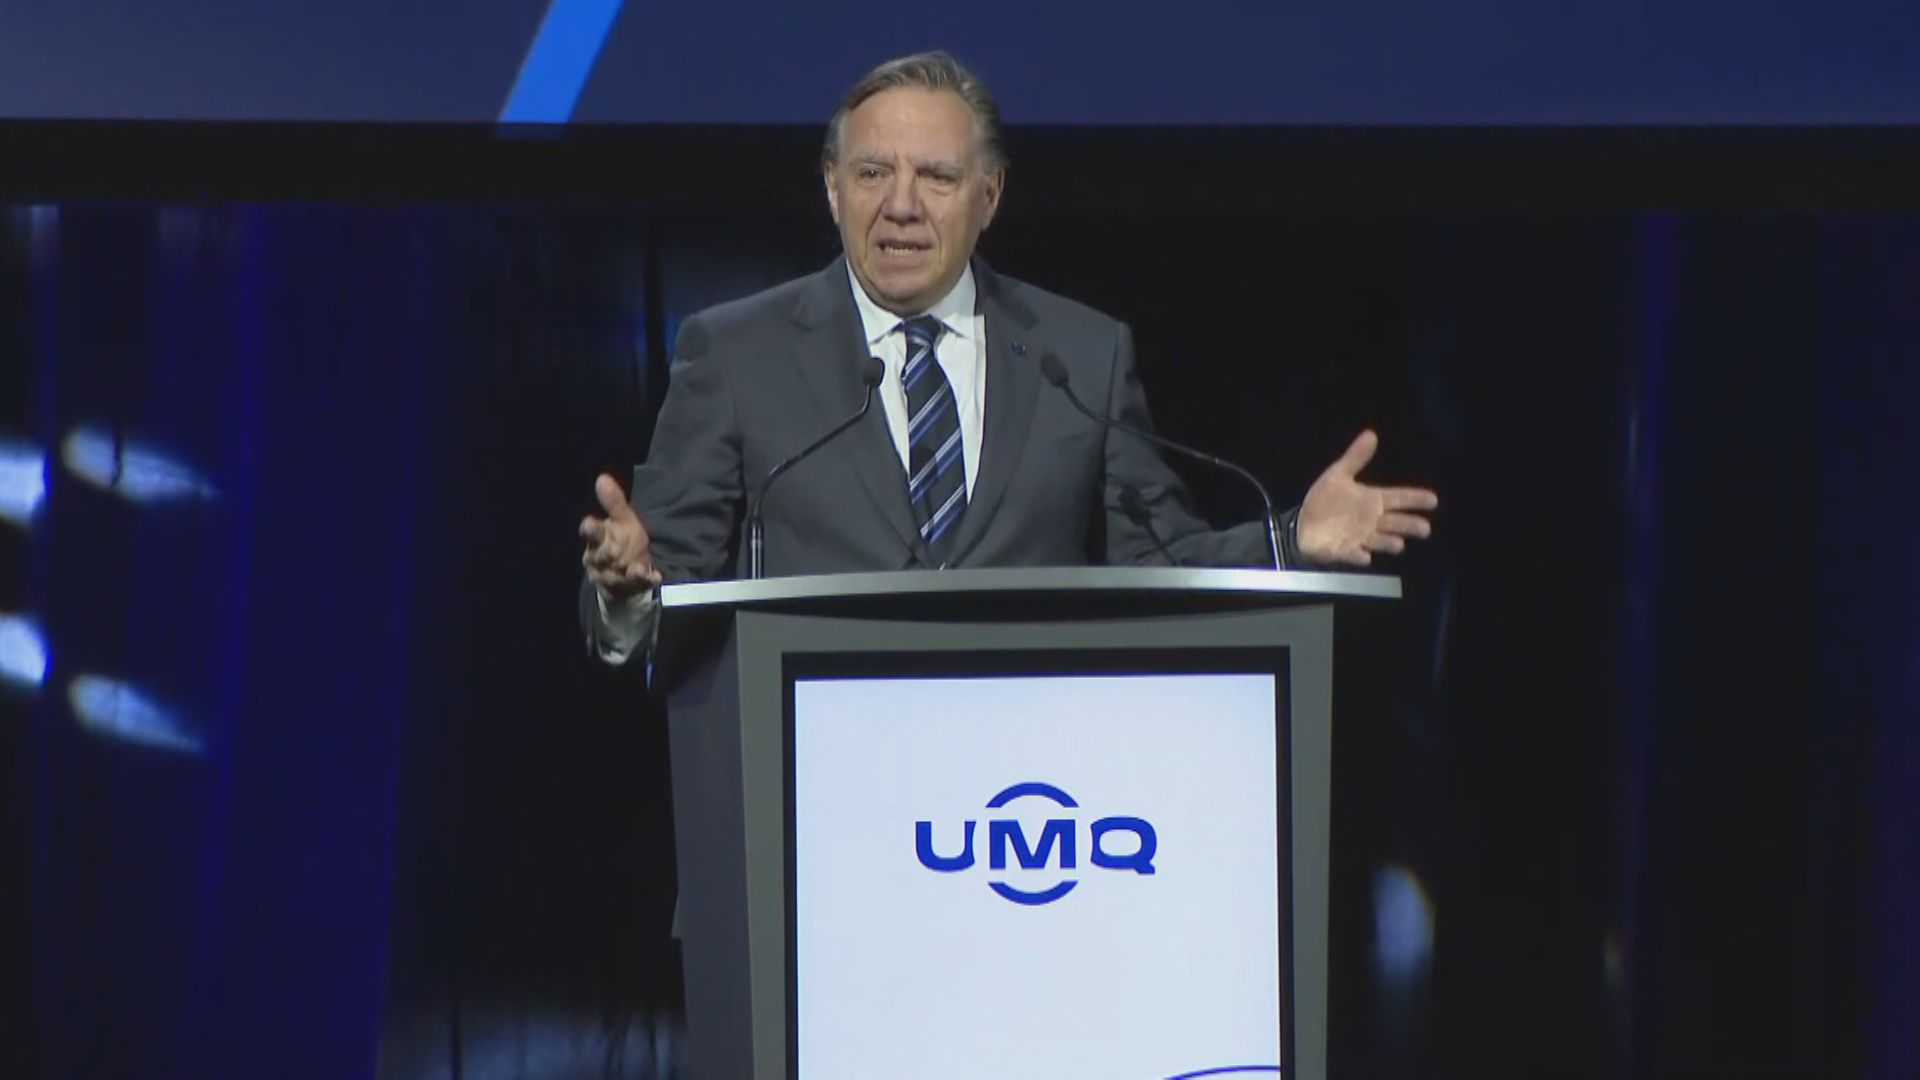 Premier François Legault apologizes to mayors after calling them ‘beggars’